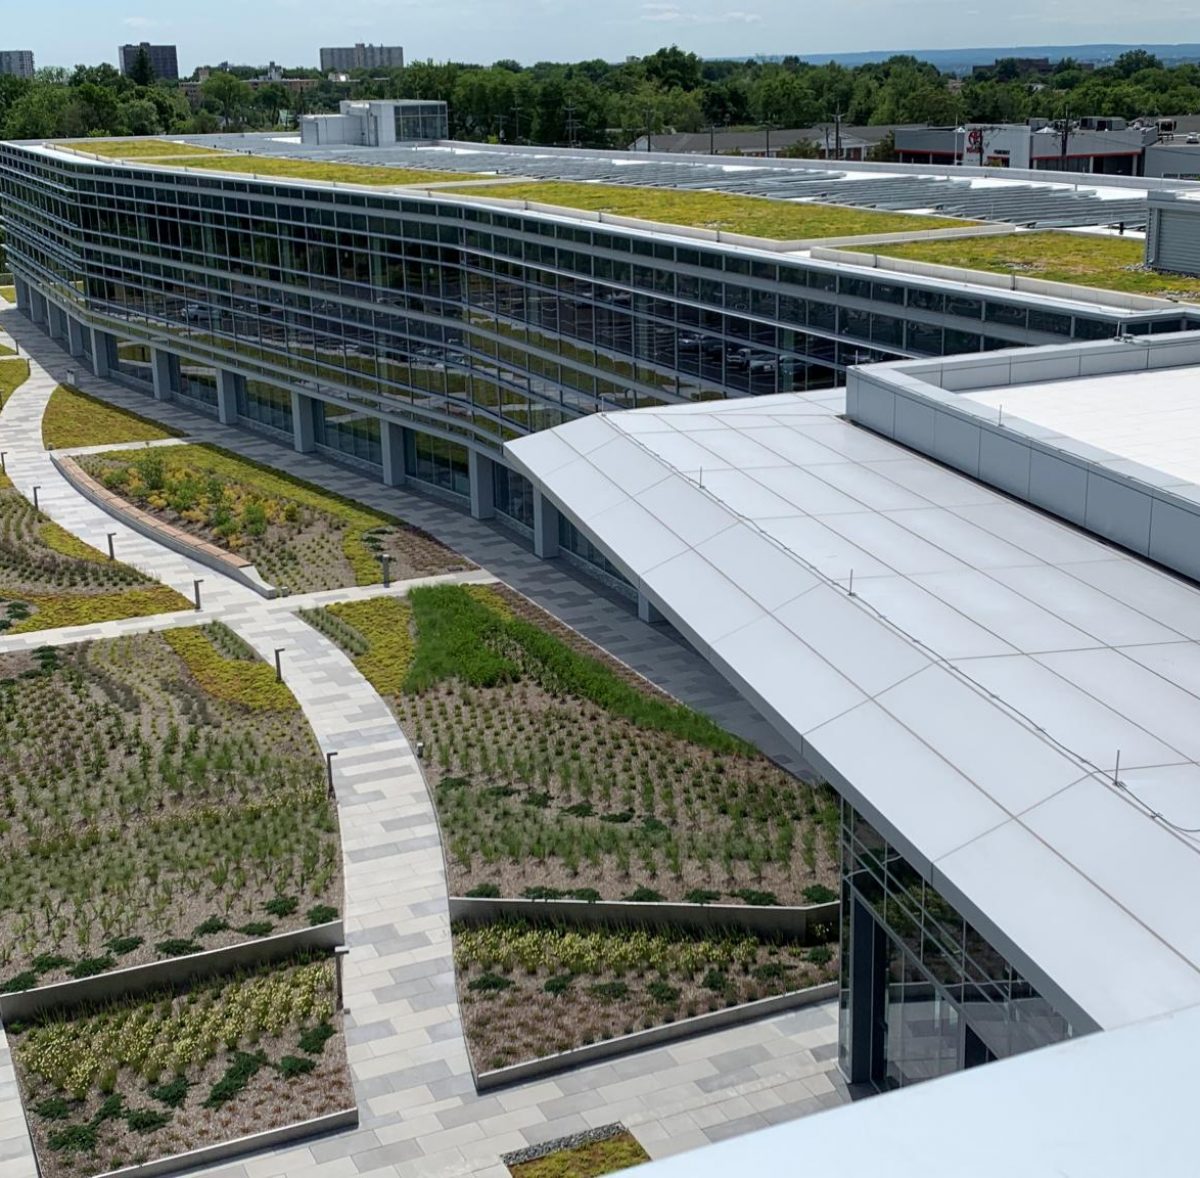 Green example: sustainable campus with LEED Platinum Certification</strong>